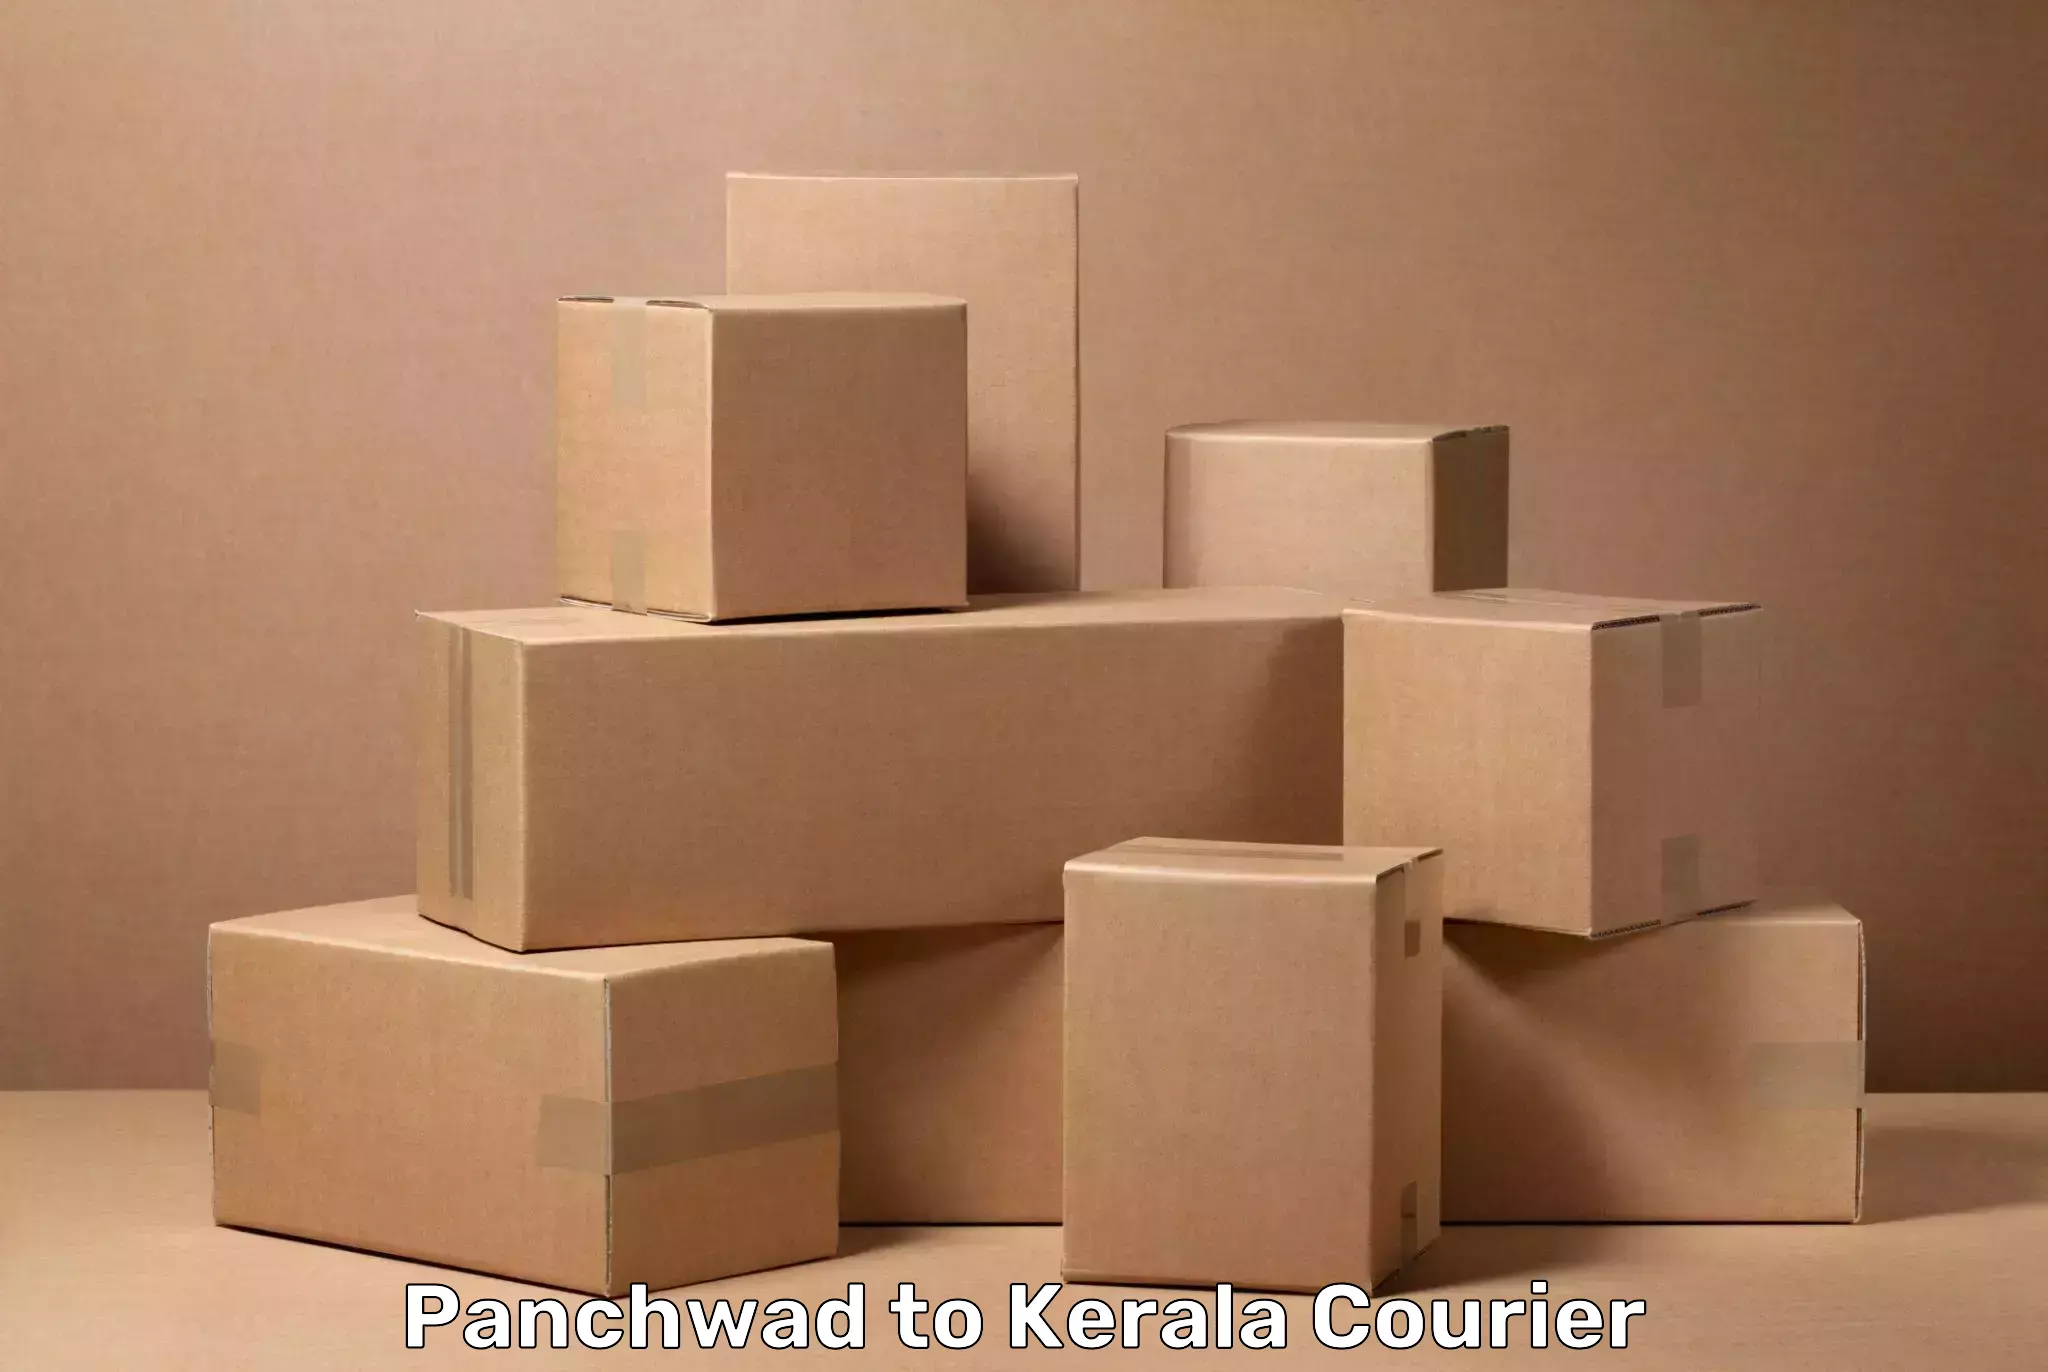 Baggage transport estimate Panchwad to Cochin University of Science and Technology